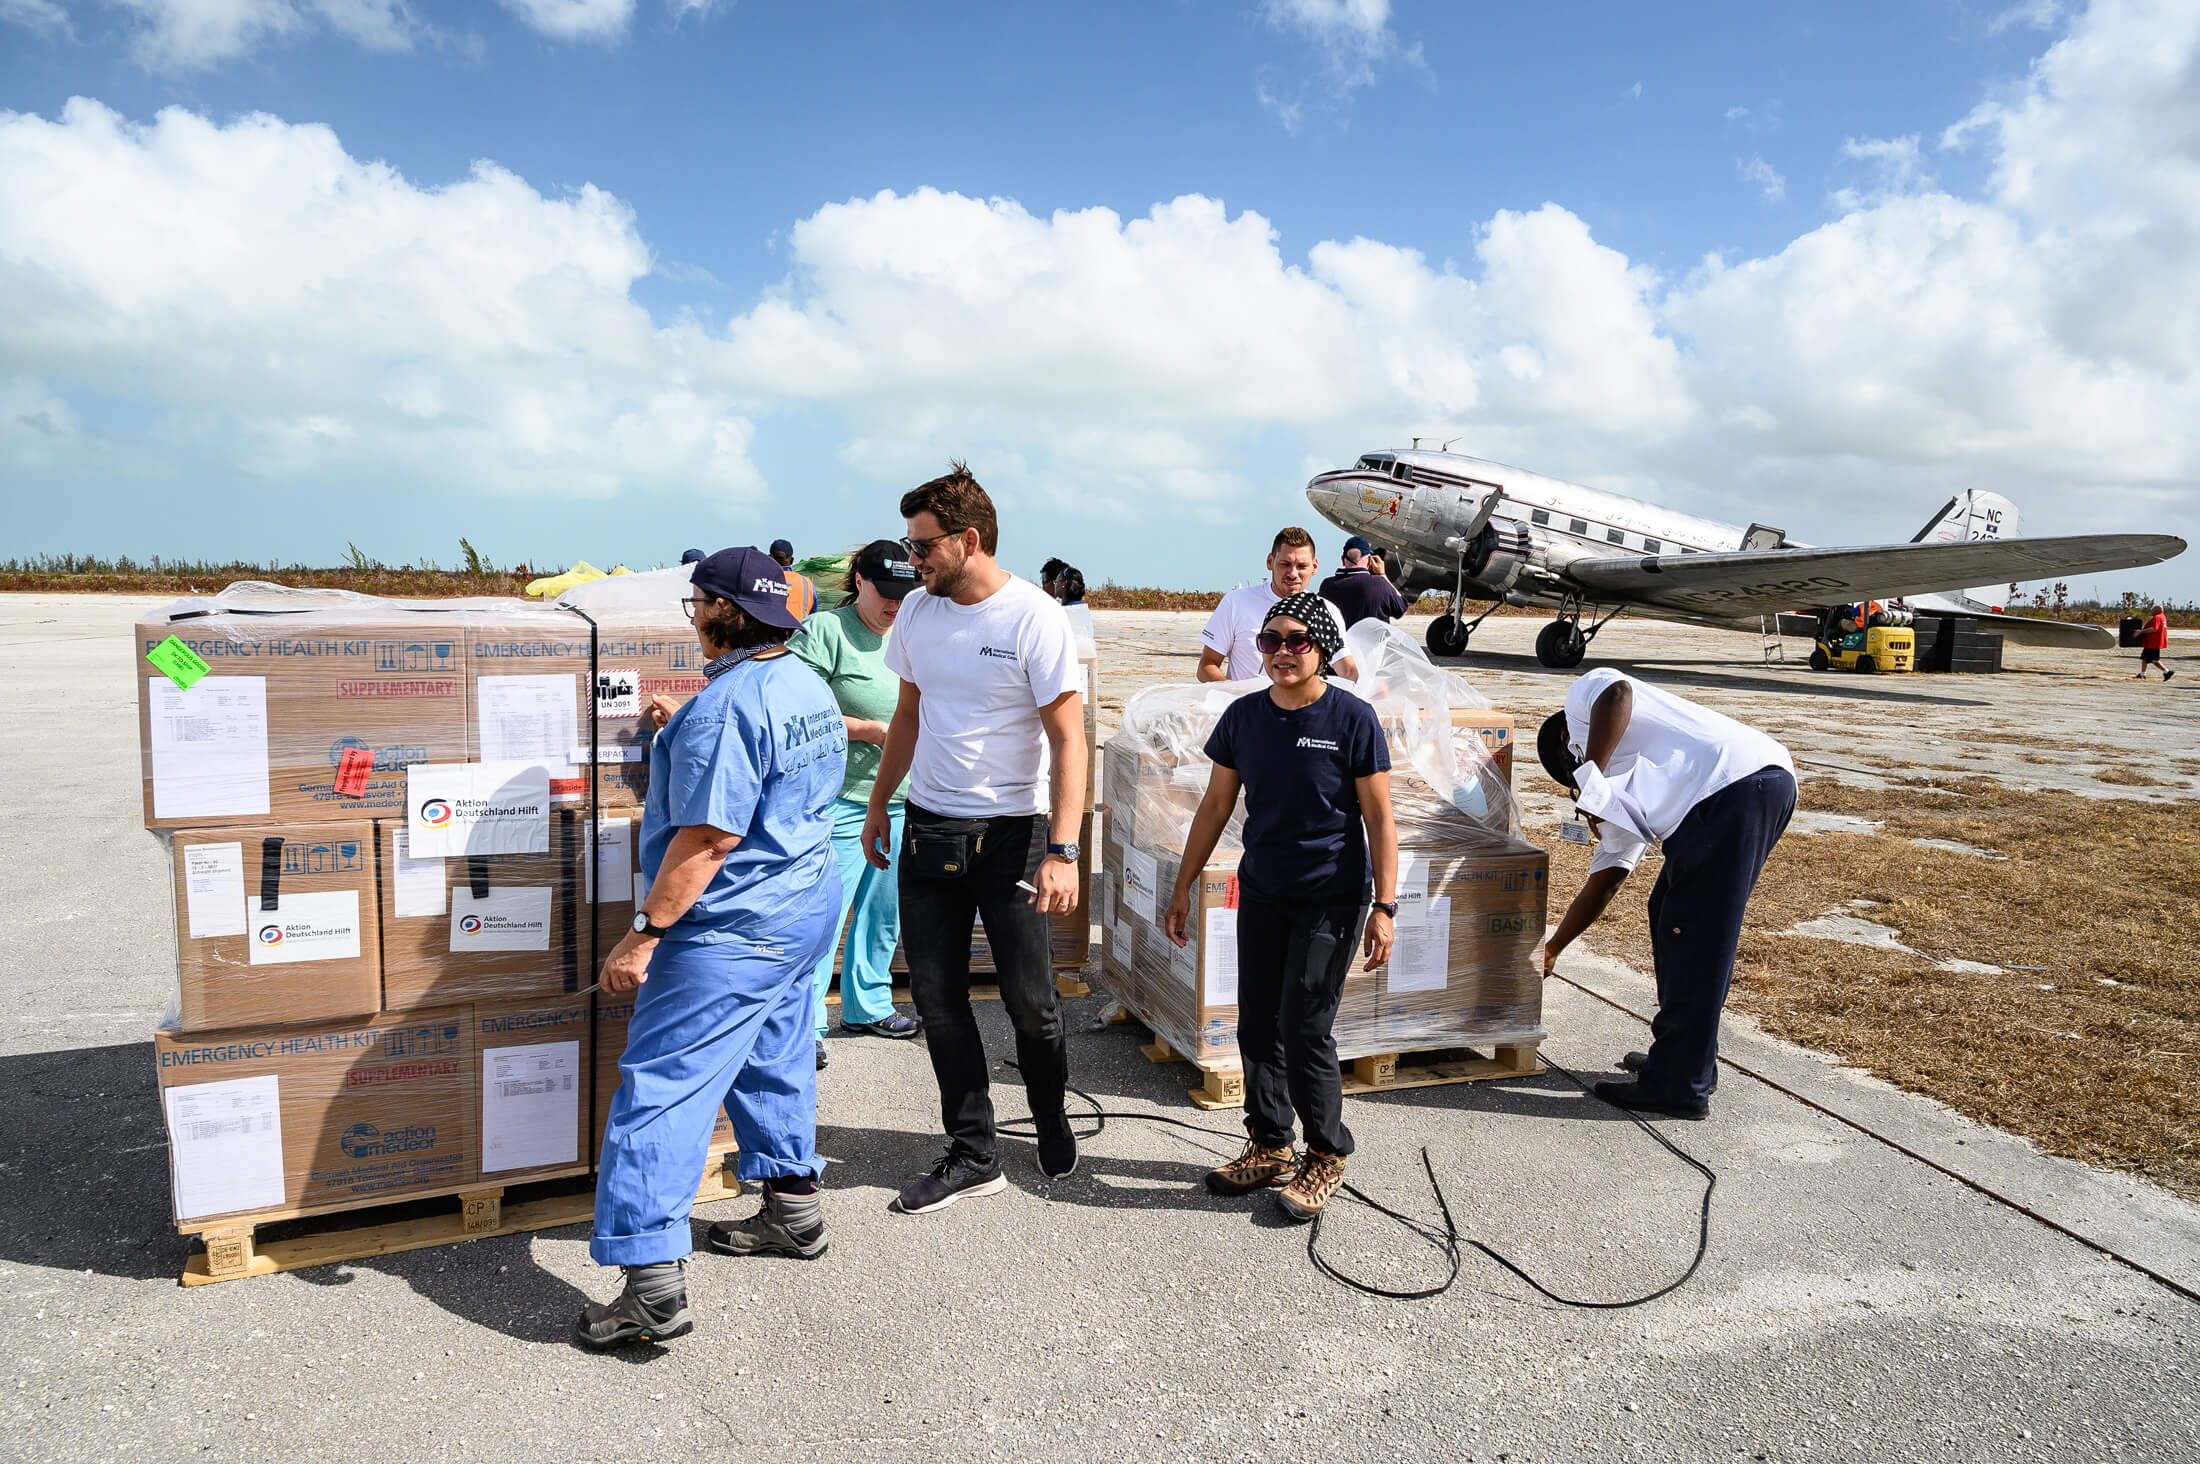 International Medical Corps Emergency Response Team members unload a shipment of emergency supplies in Freeport, the Bahamas, in the wake of 2019’s Hurricane Dorian. The shipments contained essential medicines, consumables and other equipment necessary to serve hurricane-stricken communities.